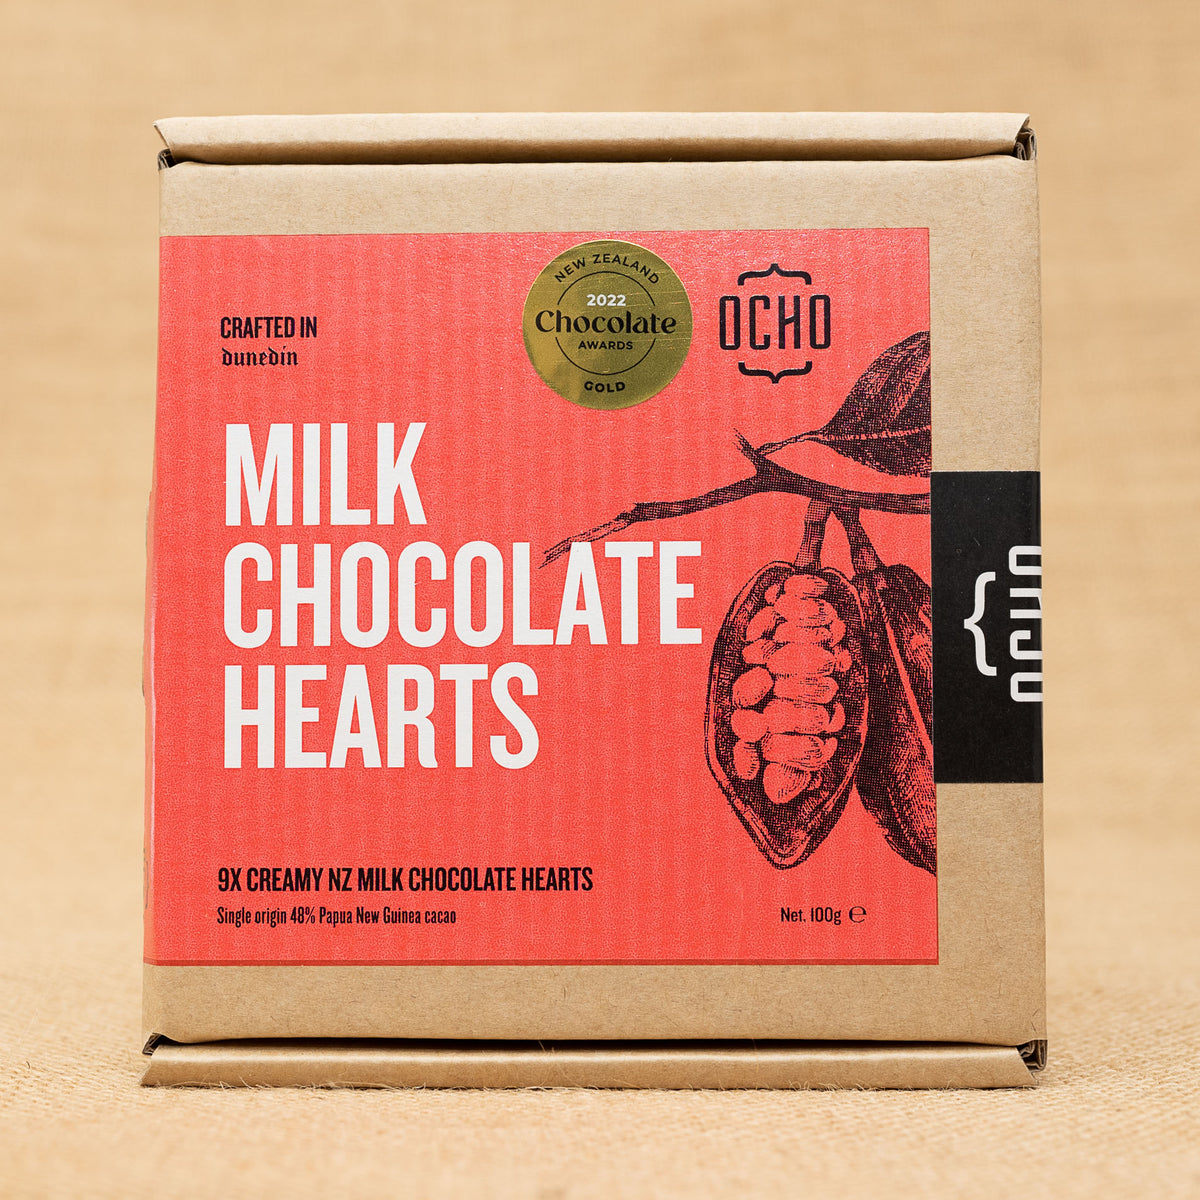 OCHO Pure Milk Chocolate Love Hearts, the front of the recyclable packaging showing the label, including a gold award sticker from the 2022 New Zealand Chocolate Awards.